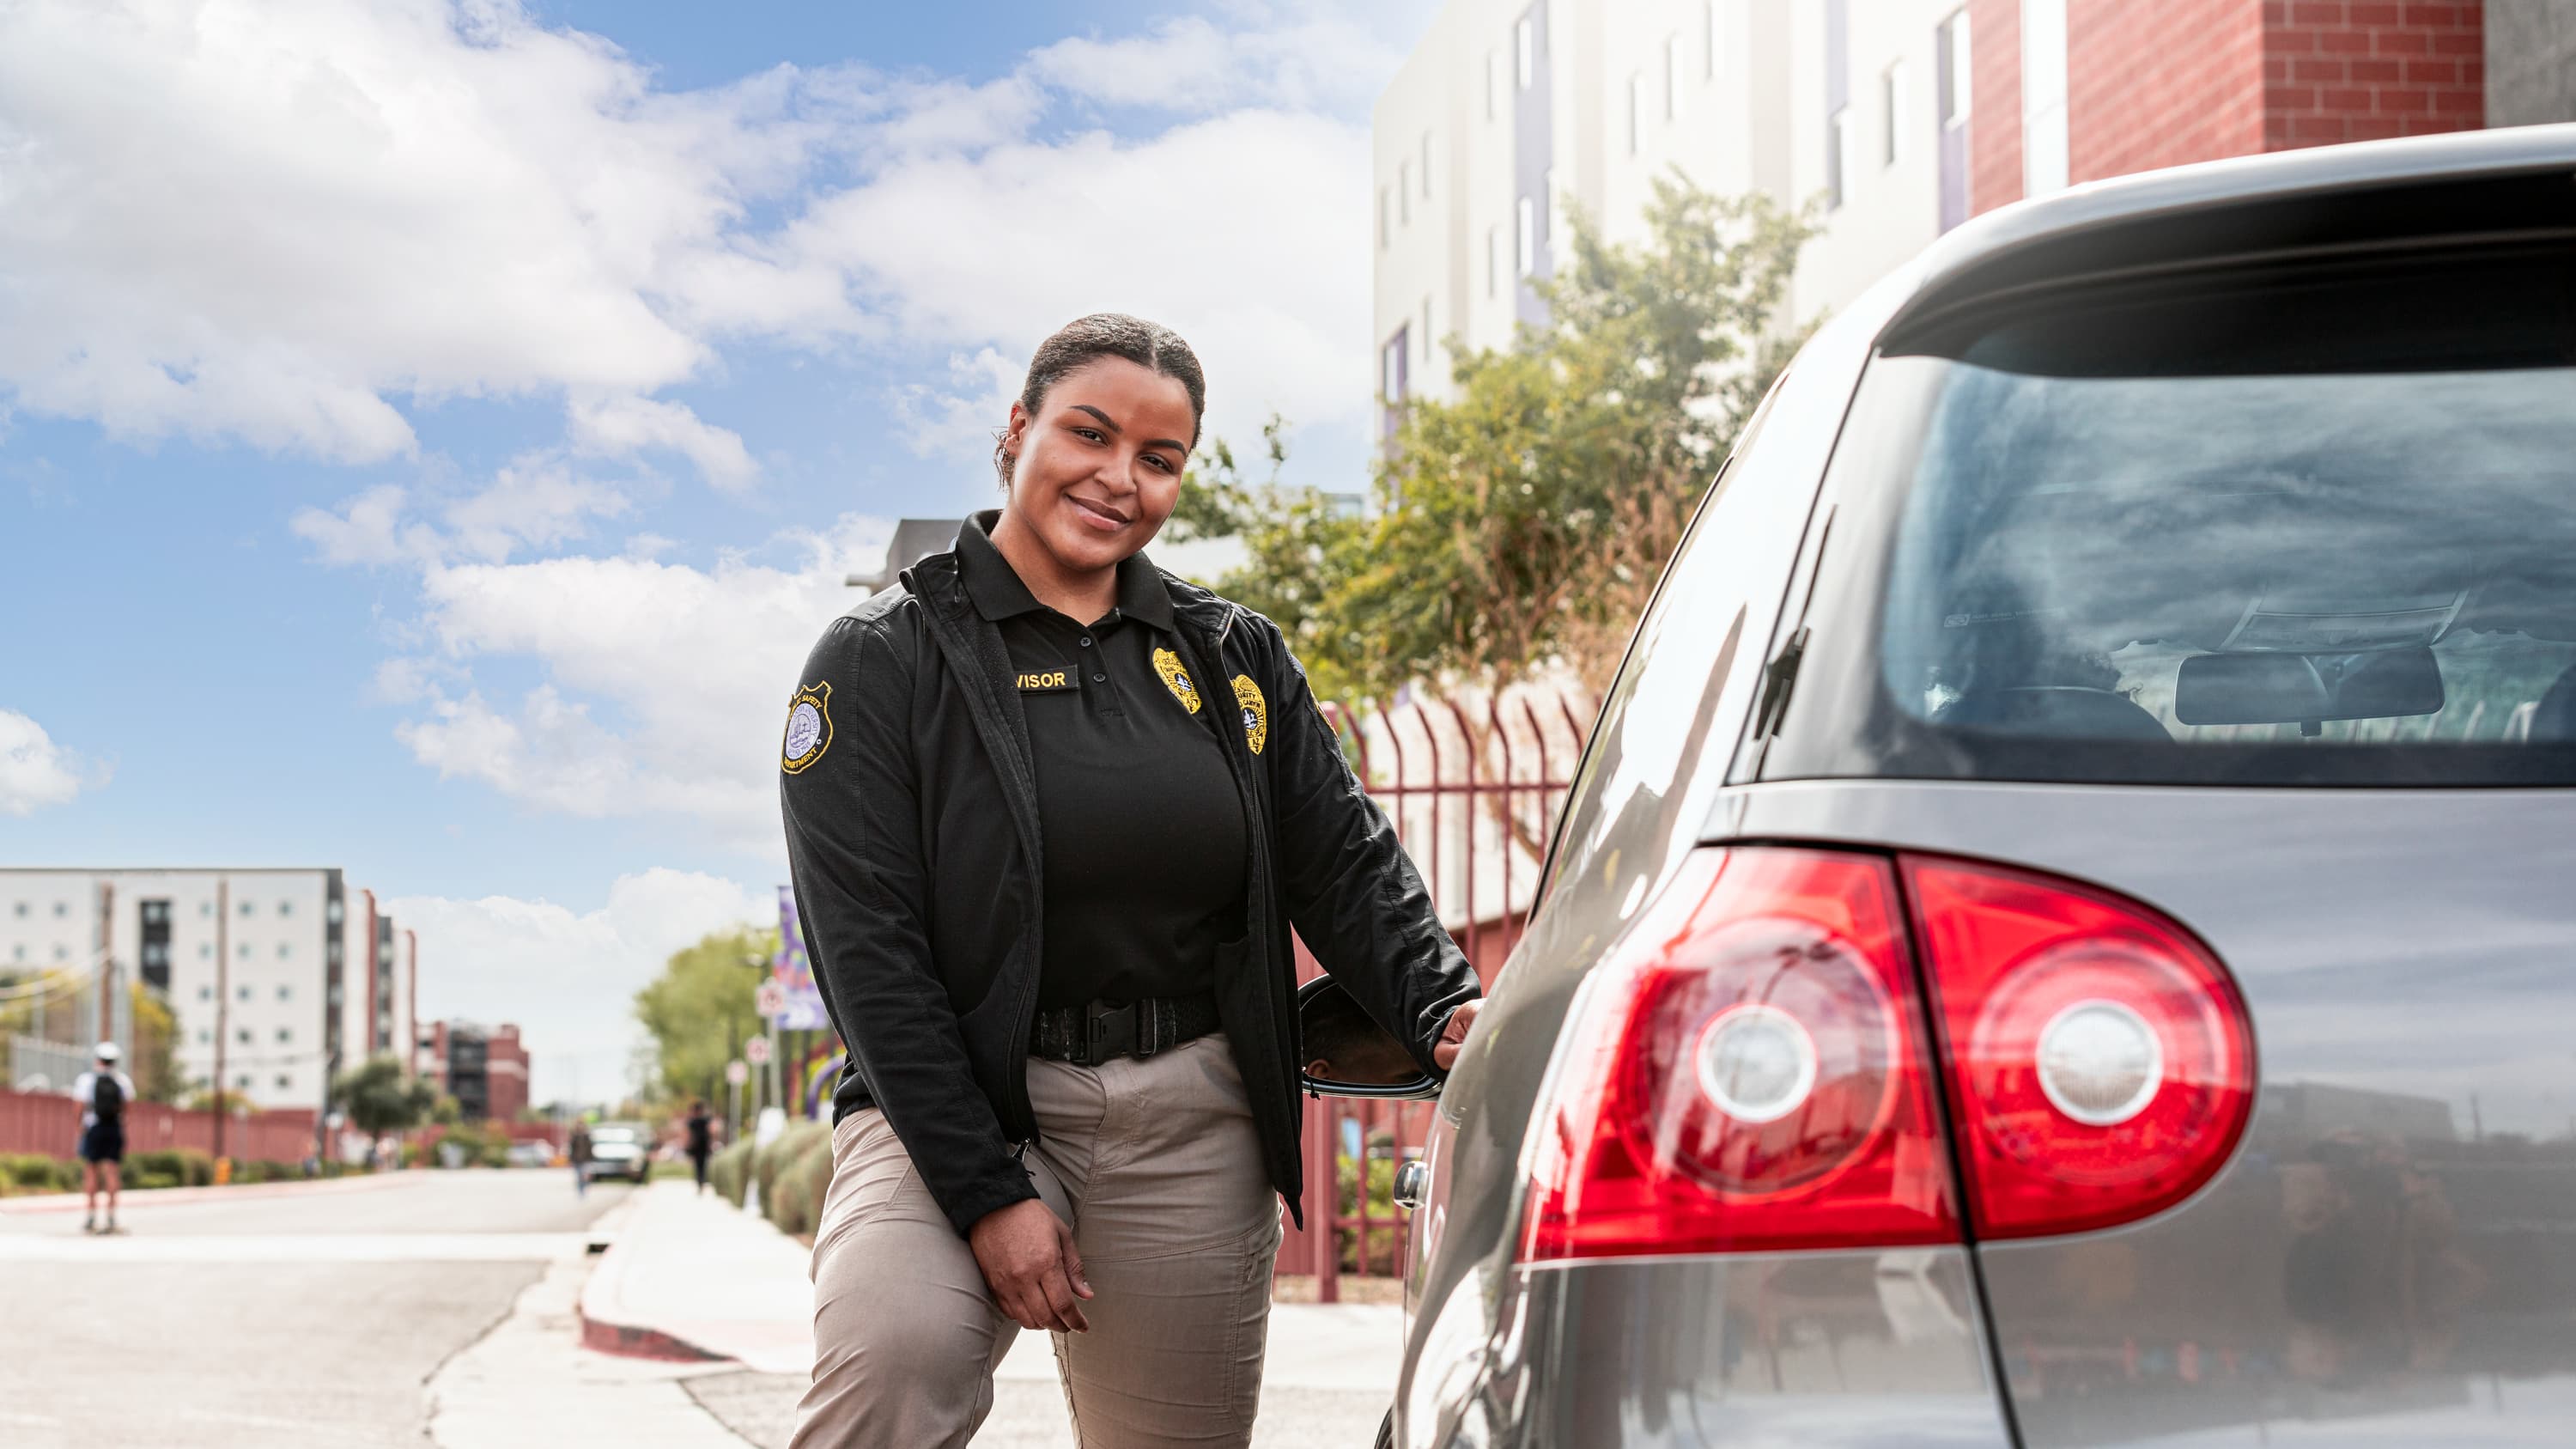 Female legal studies degree graduate smiling next to car as Public Safety Officer